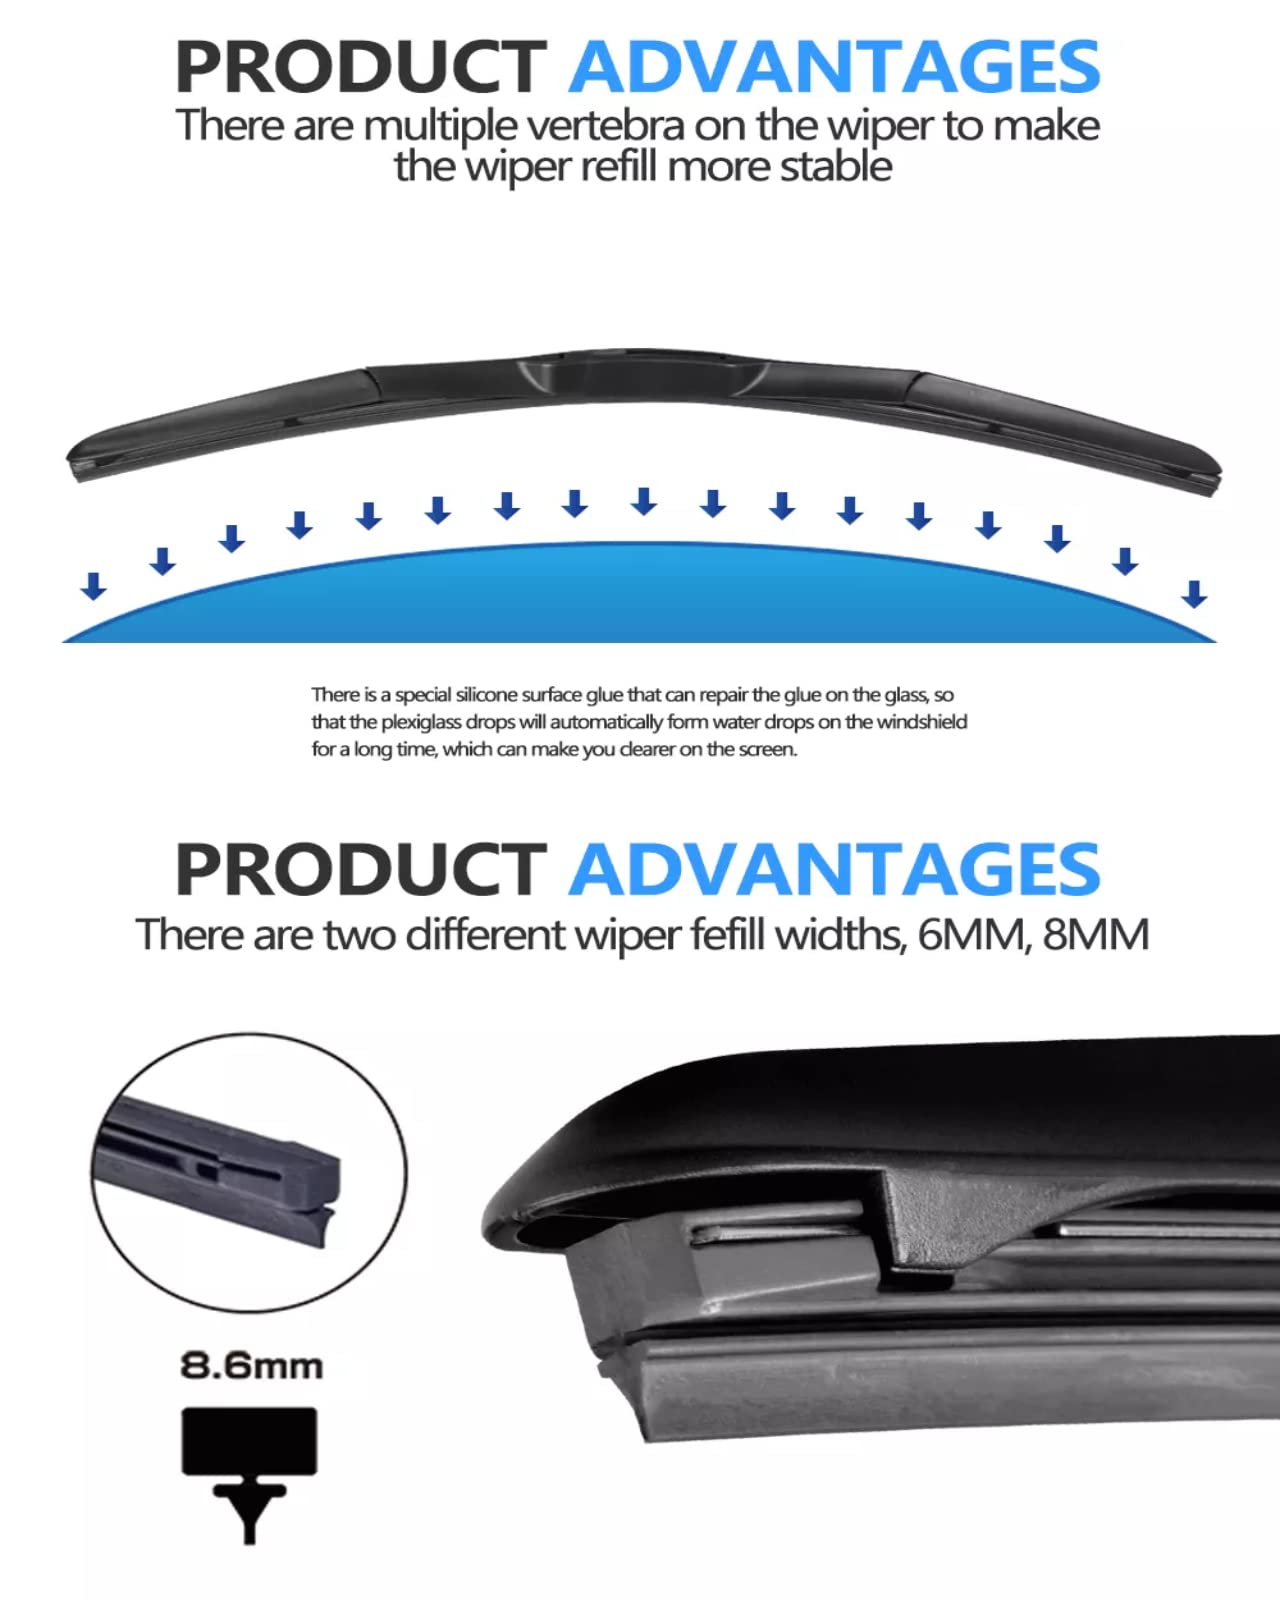 GARVEE Windshield Wipers 26 Inch 14Inch Wiper Blades OEM Quality Premium All-Seasons Stable & Quiet